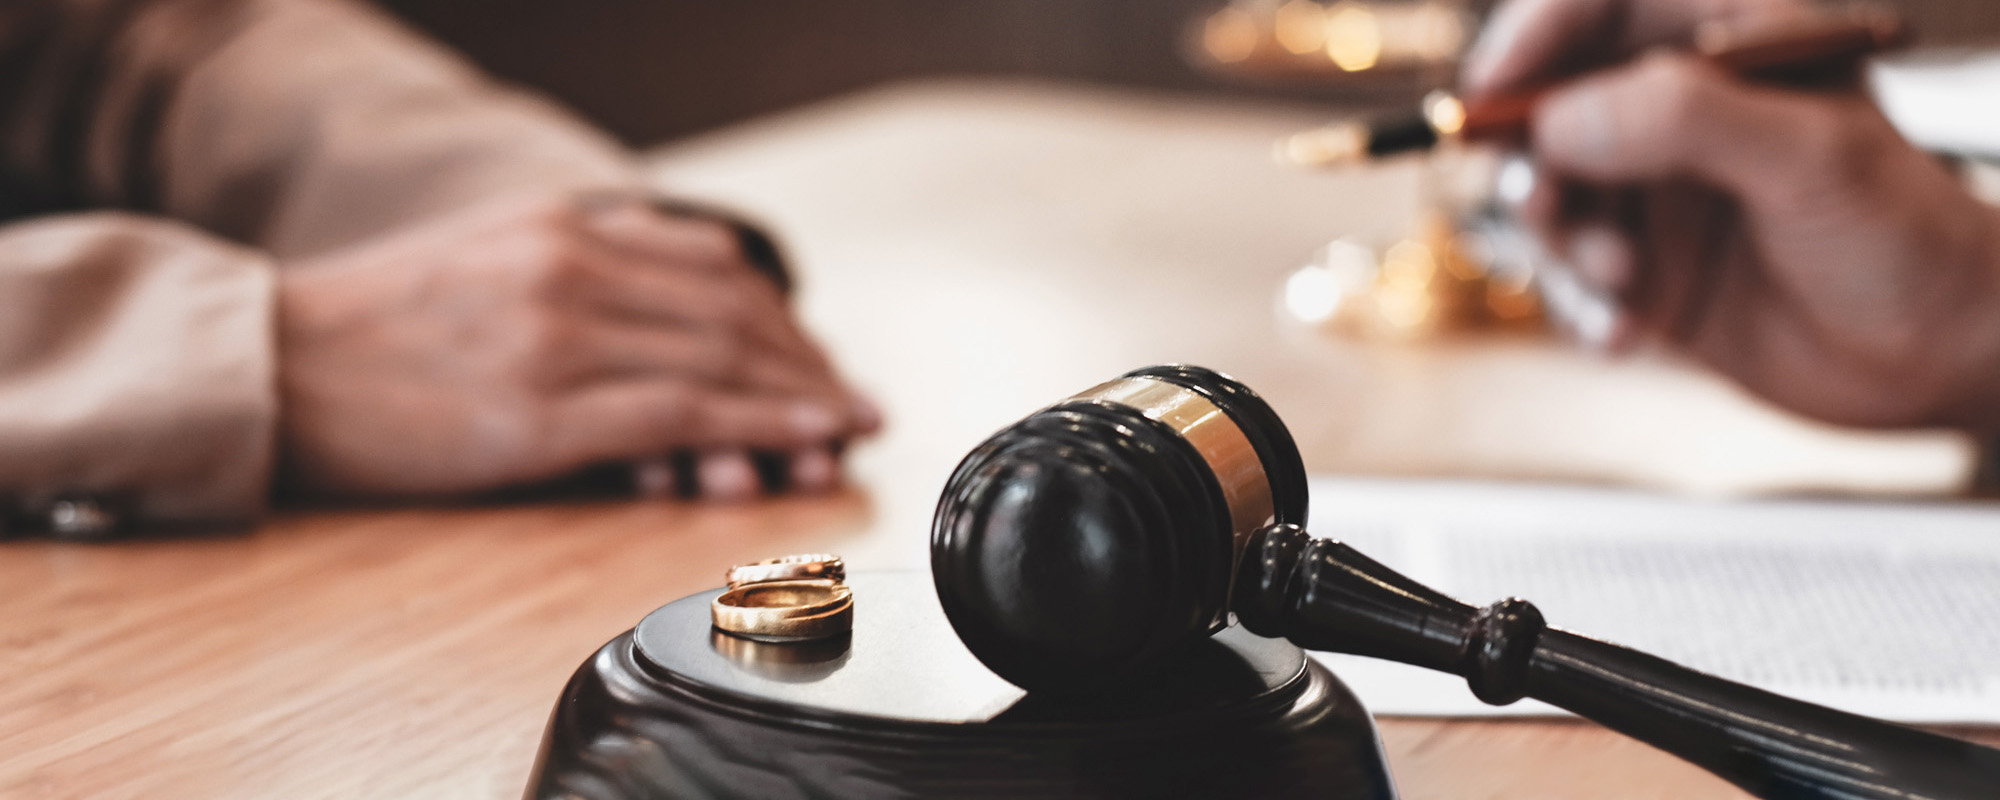 gavel and marriage rings